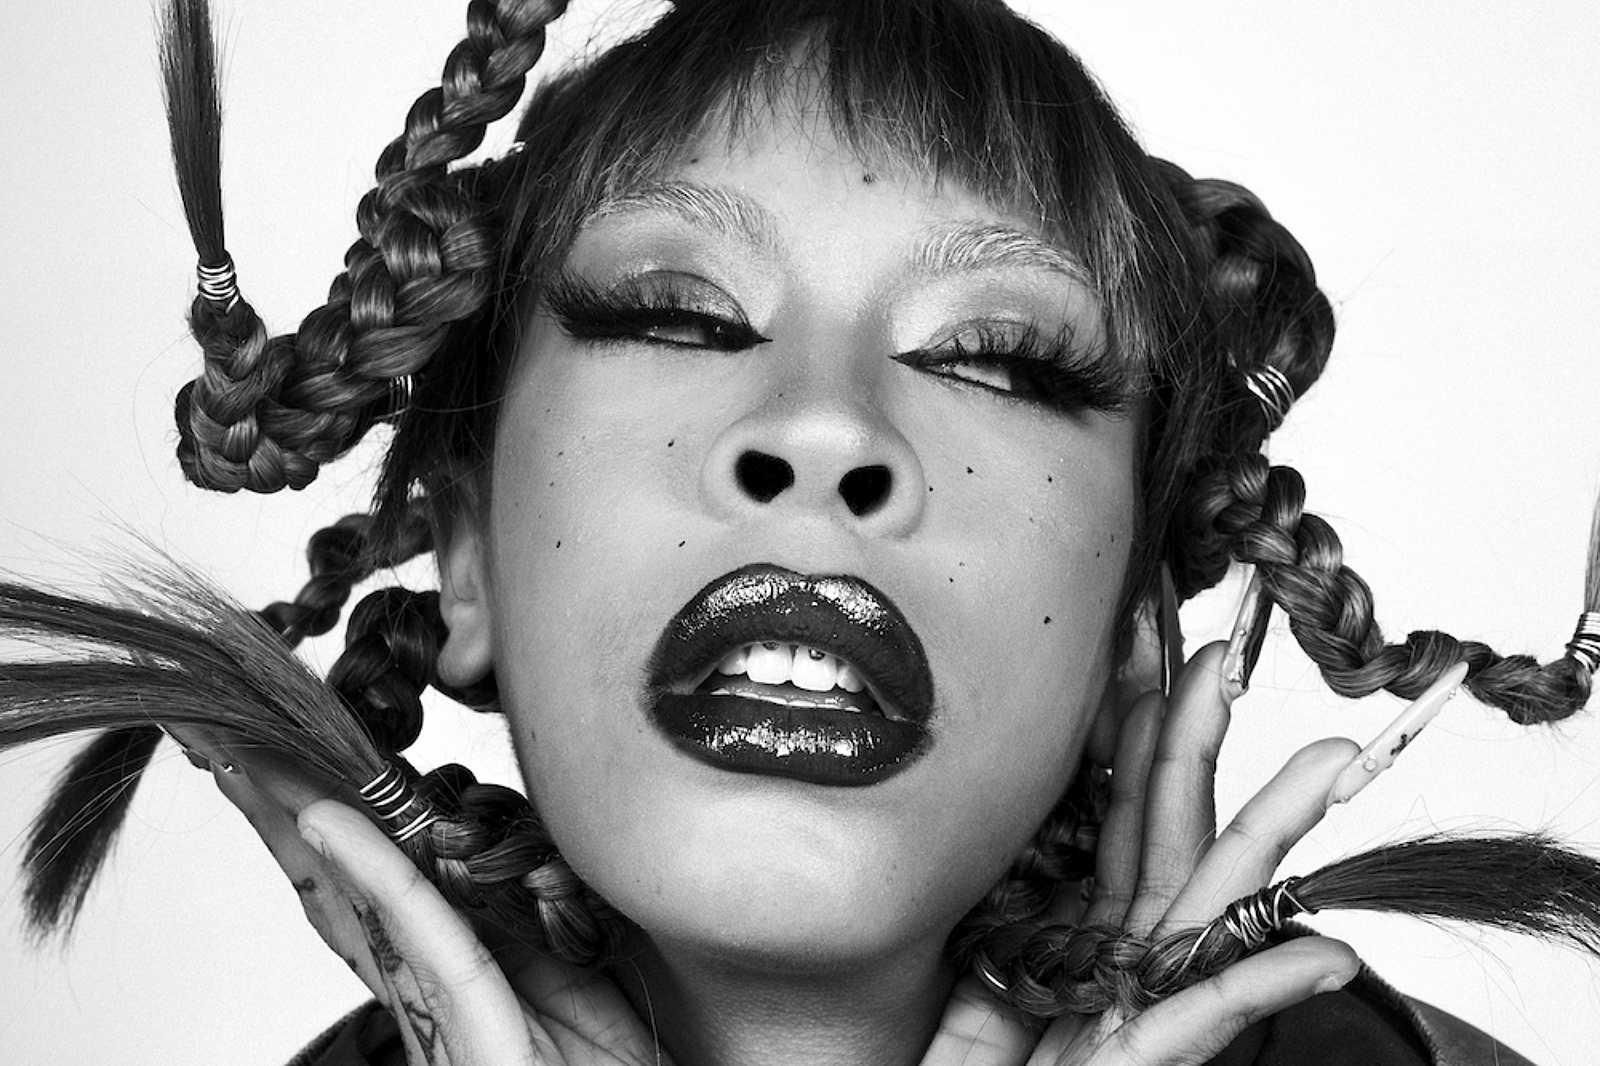 Rico Nasty to release new track with Flo Milli this week